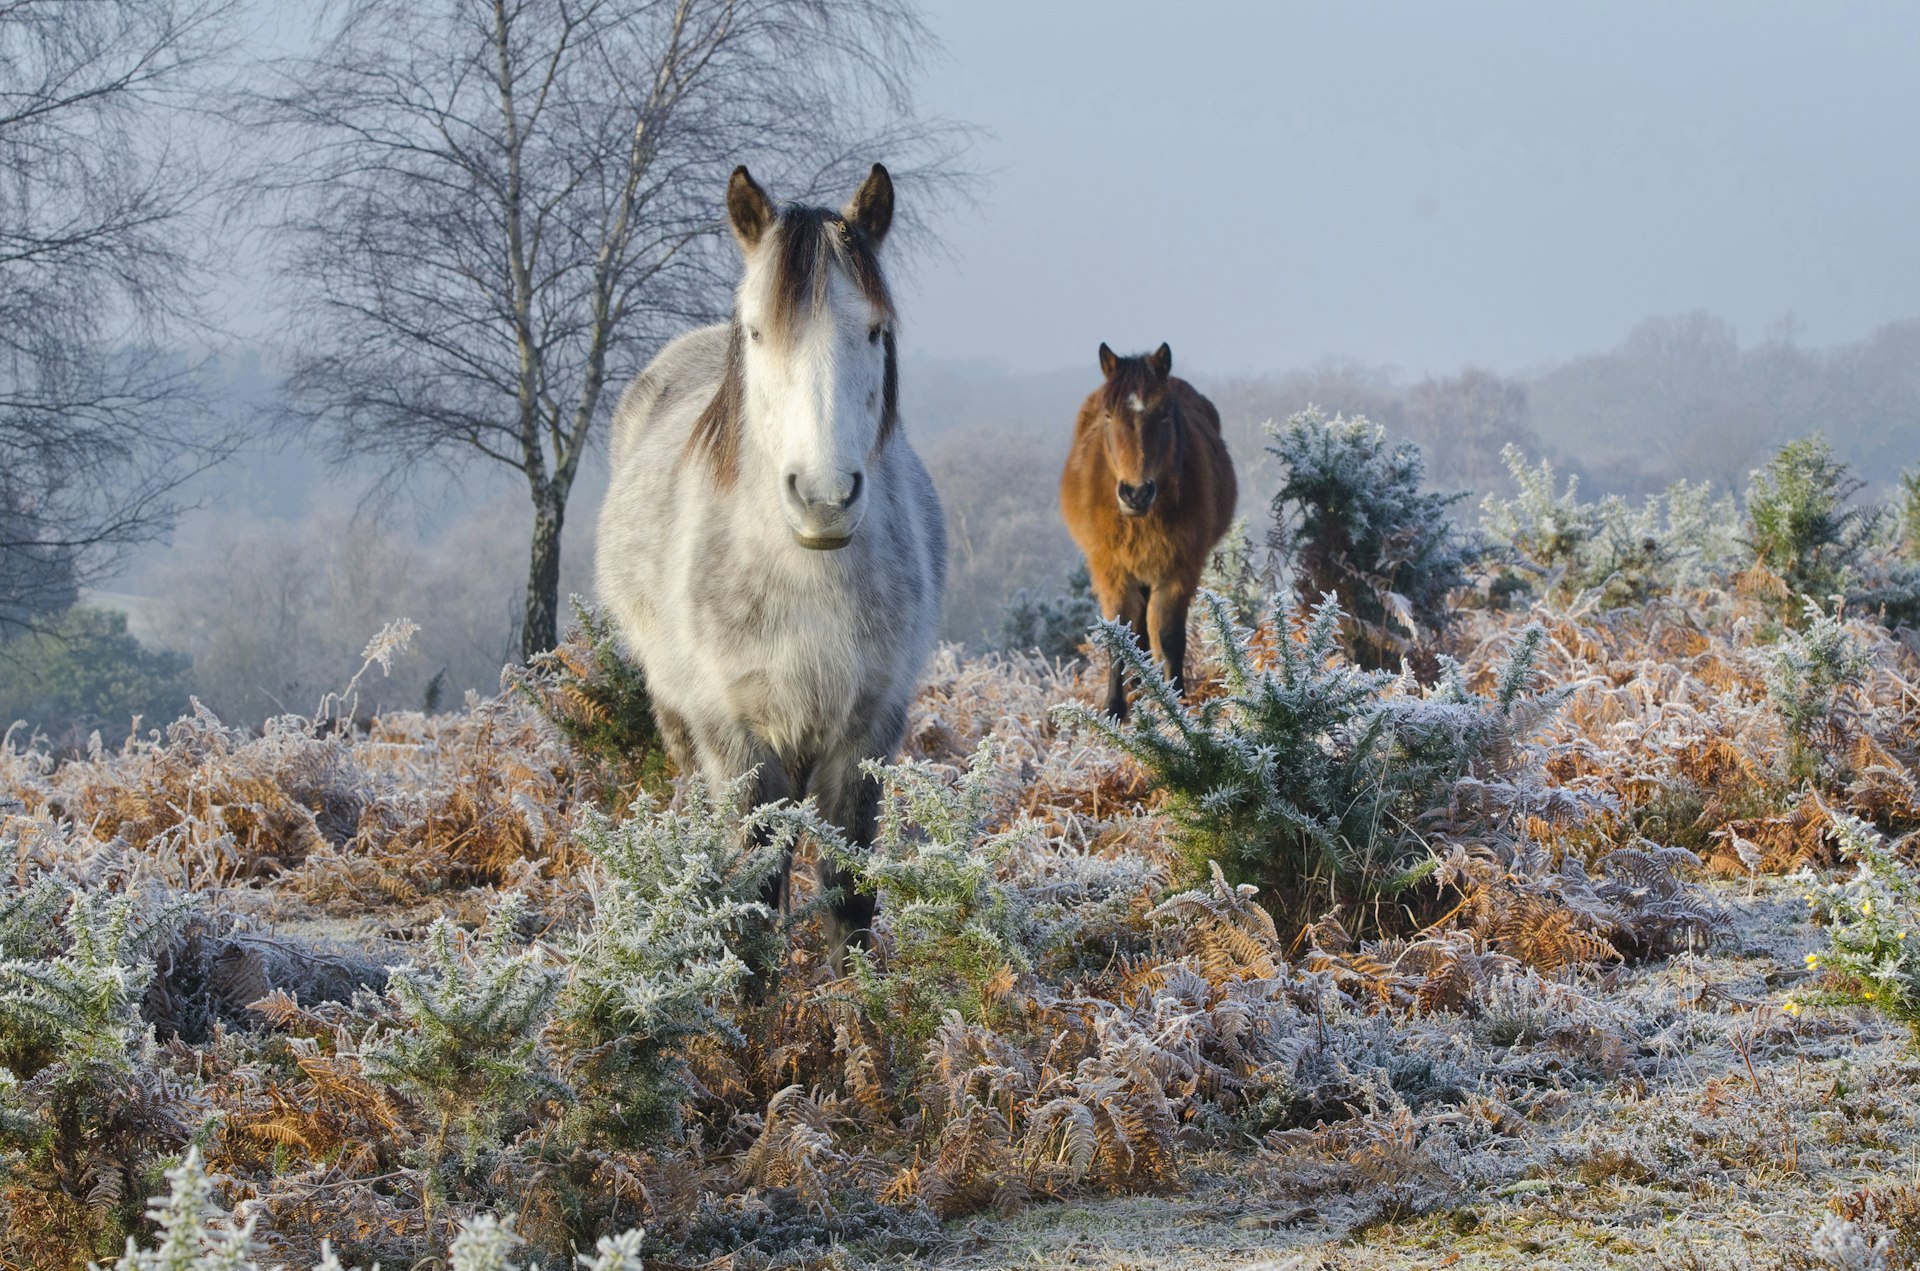 Two New Forest ponies standing among heather on a frosty morning in the New Forest, England